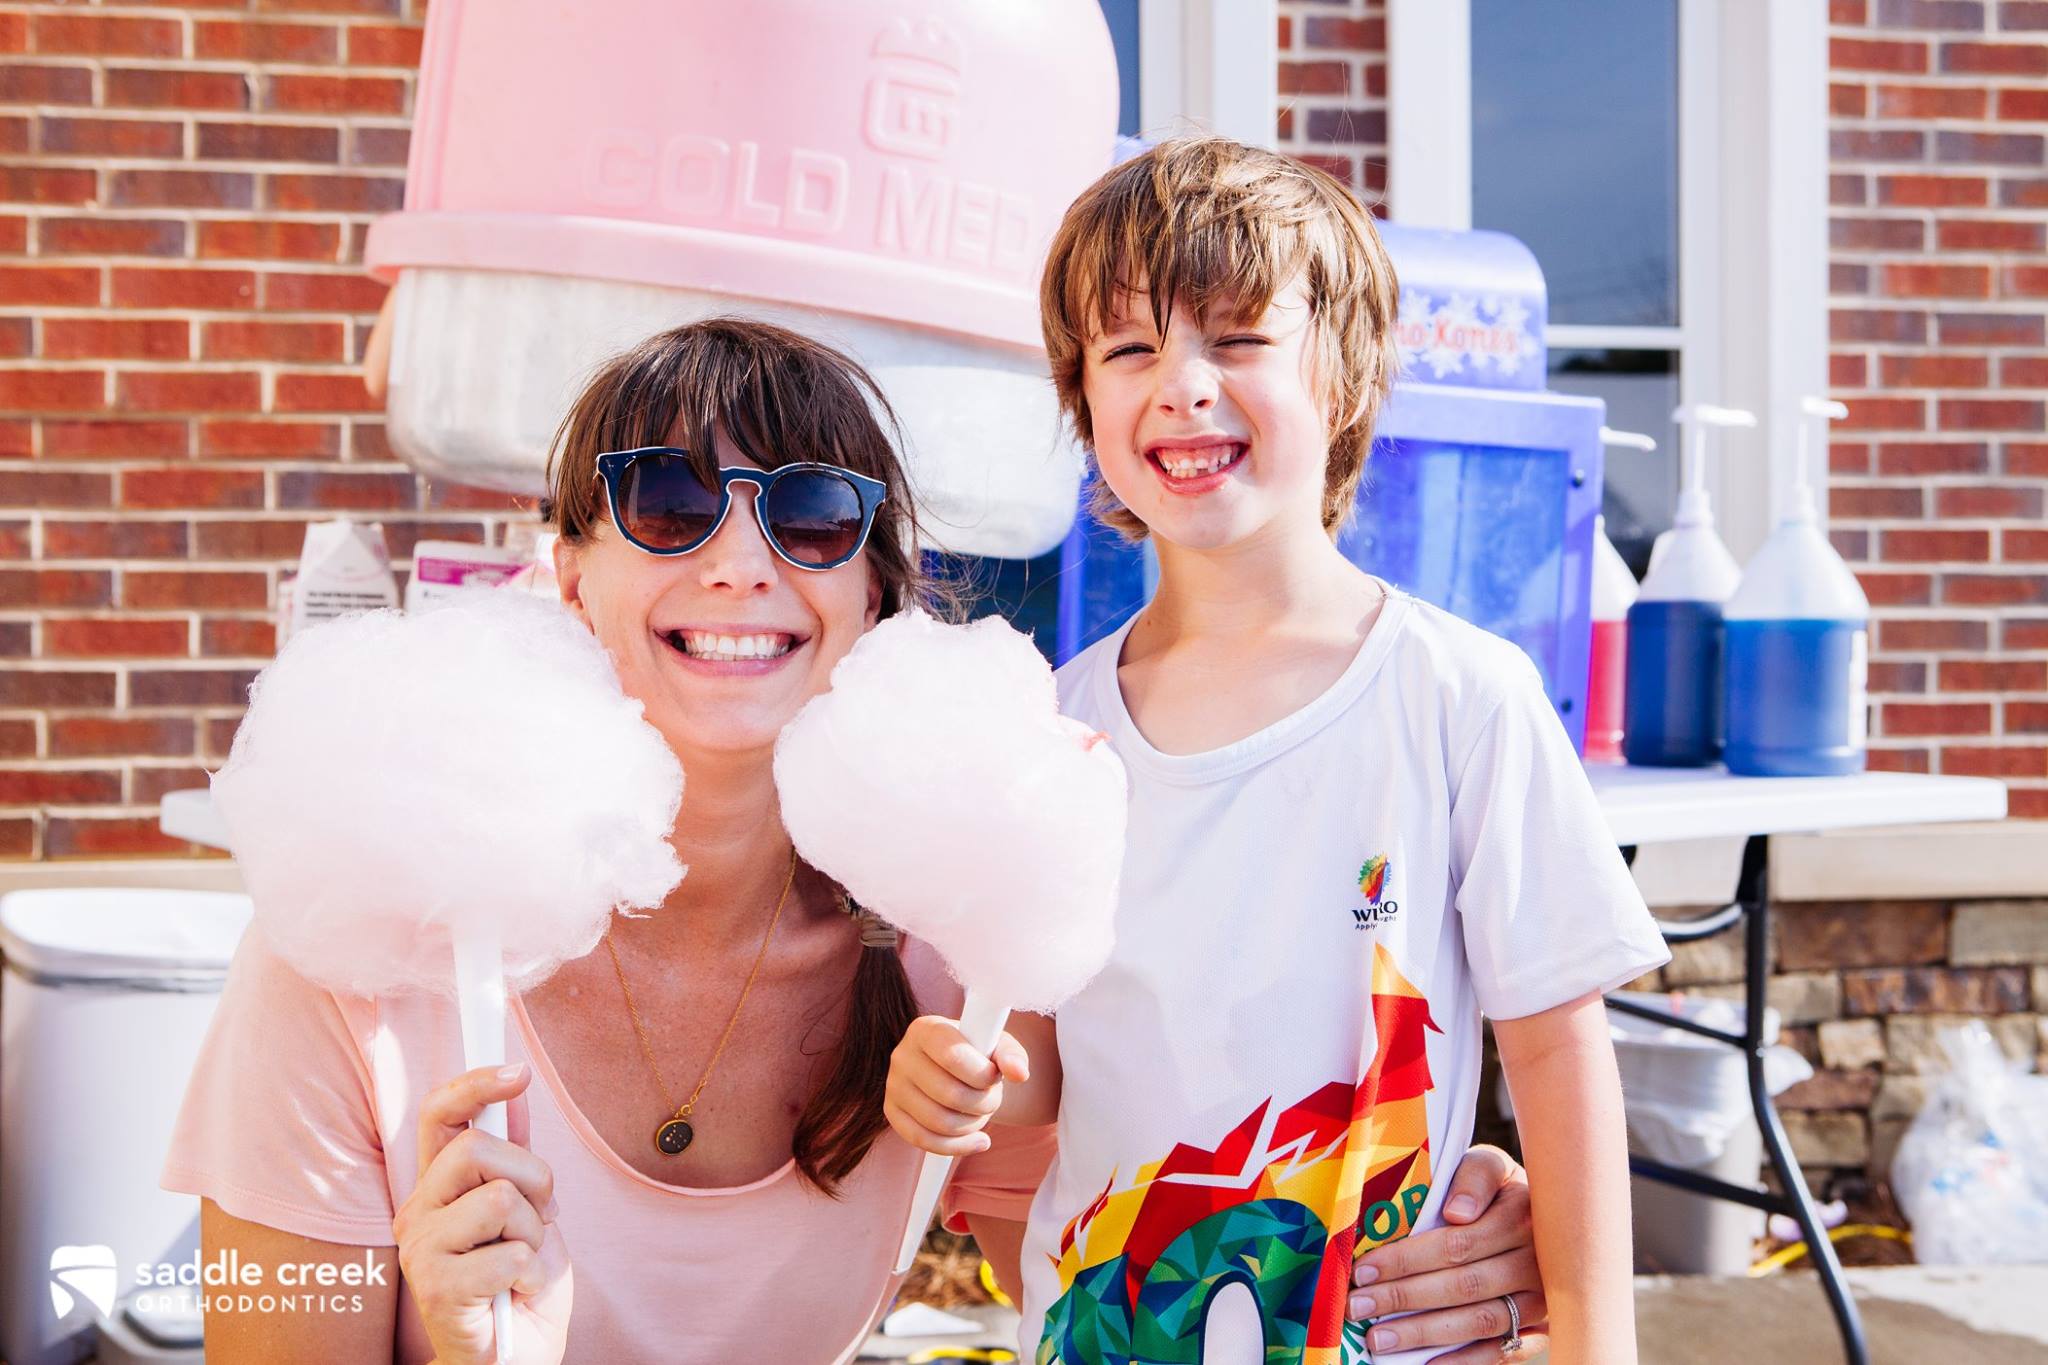 Can You Eat Cotton Candy With Braces Without Causing Damage?